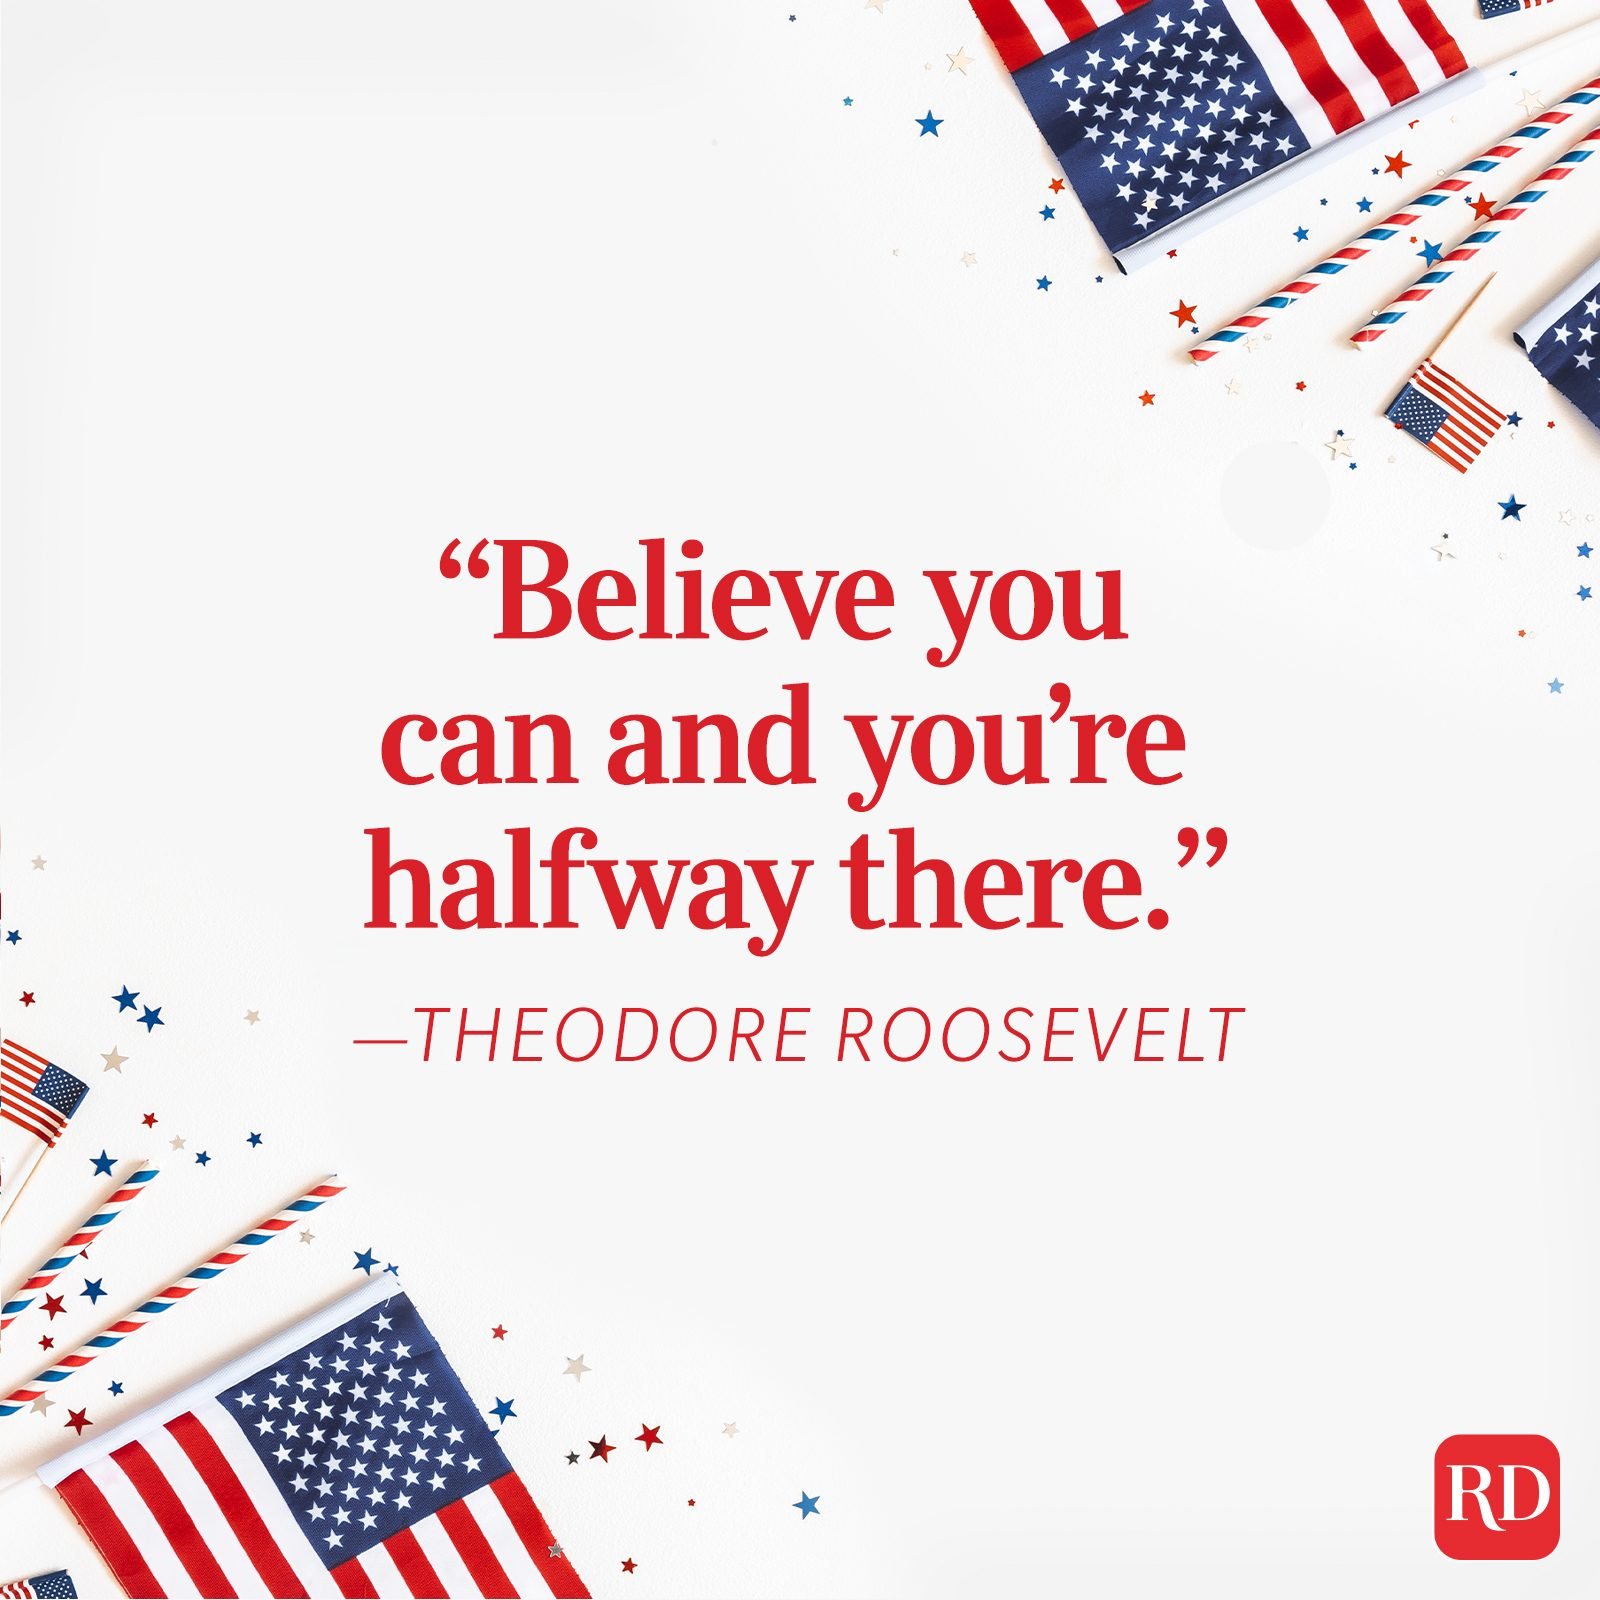 theodore roosevelt famous quotes